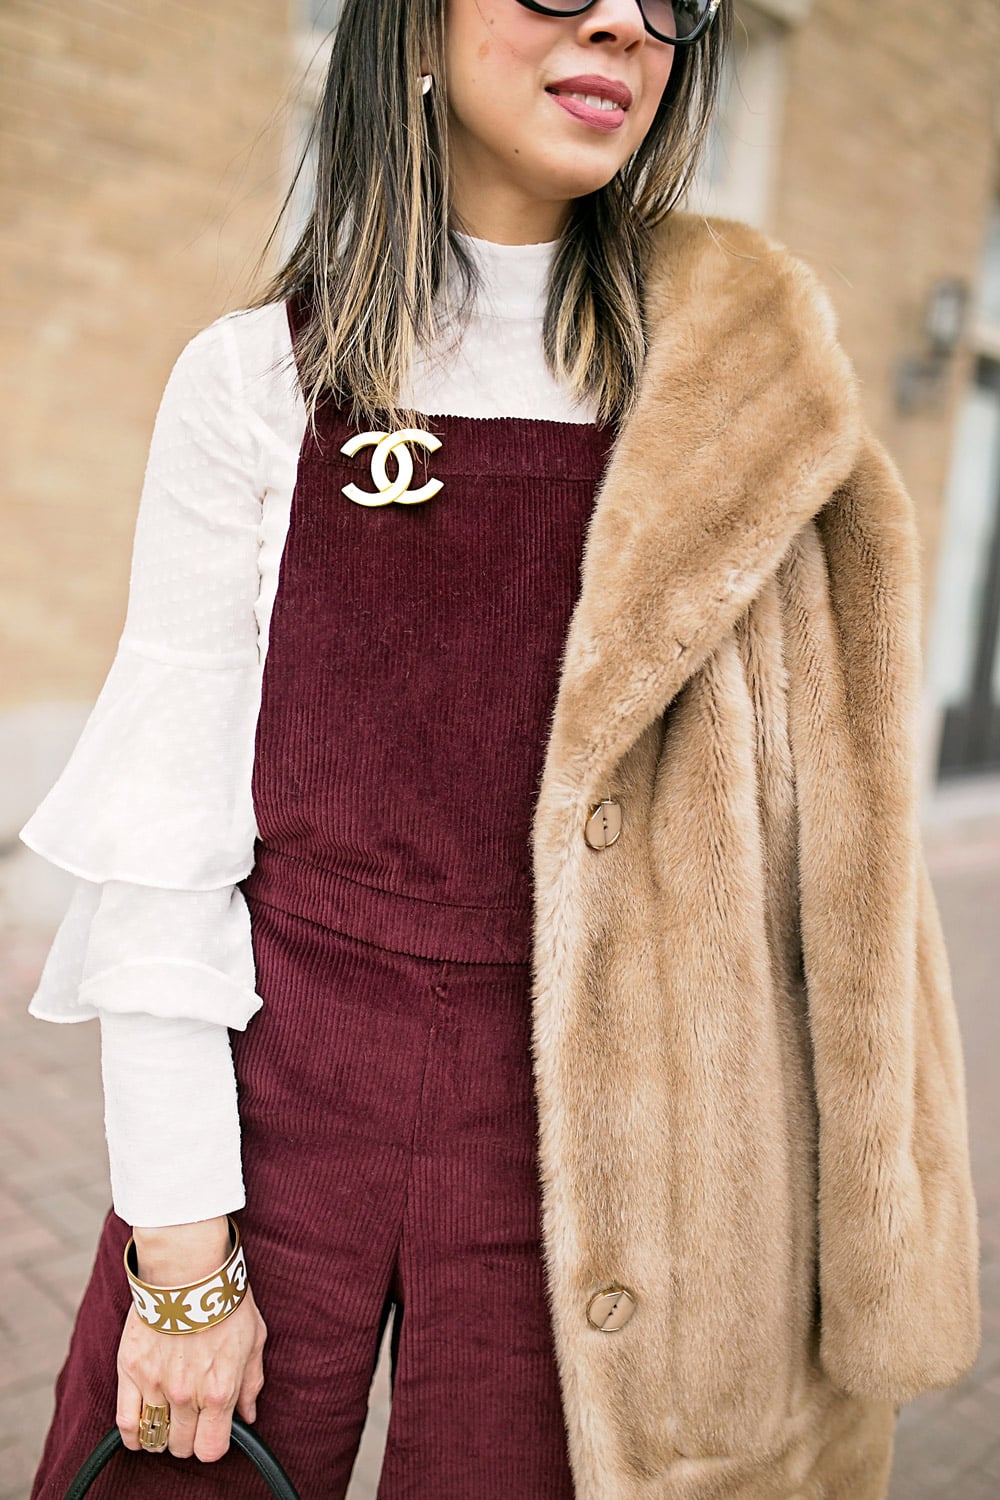 target corduroy overalls with olivia palermo chelsea28 ruffle sleeve top, faux fur coat and chanel brooch